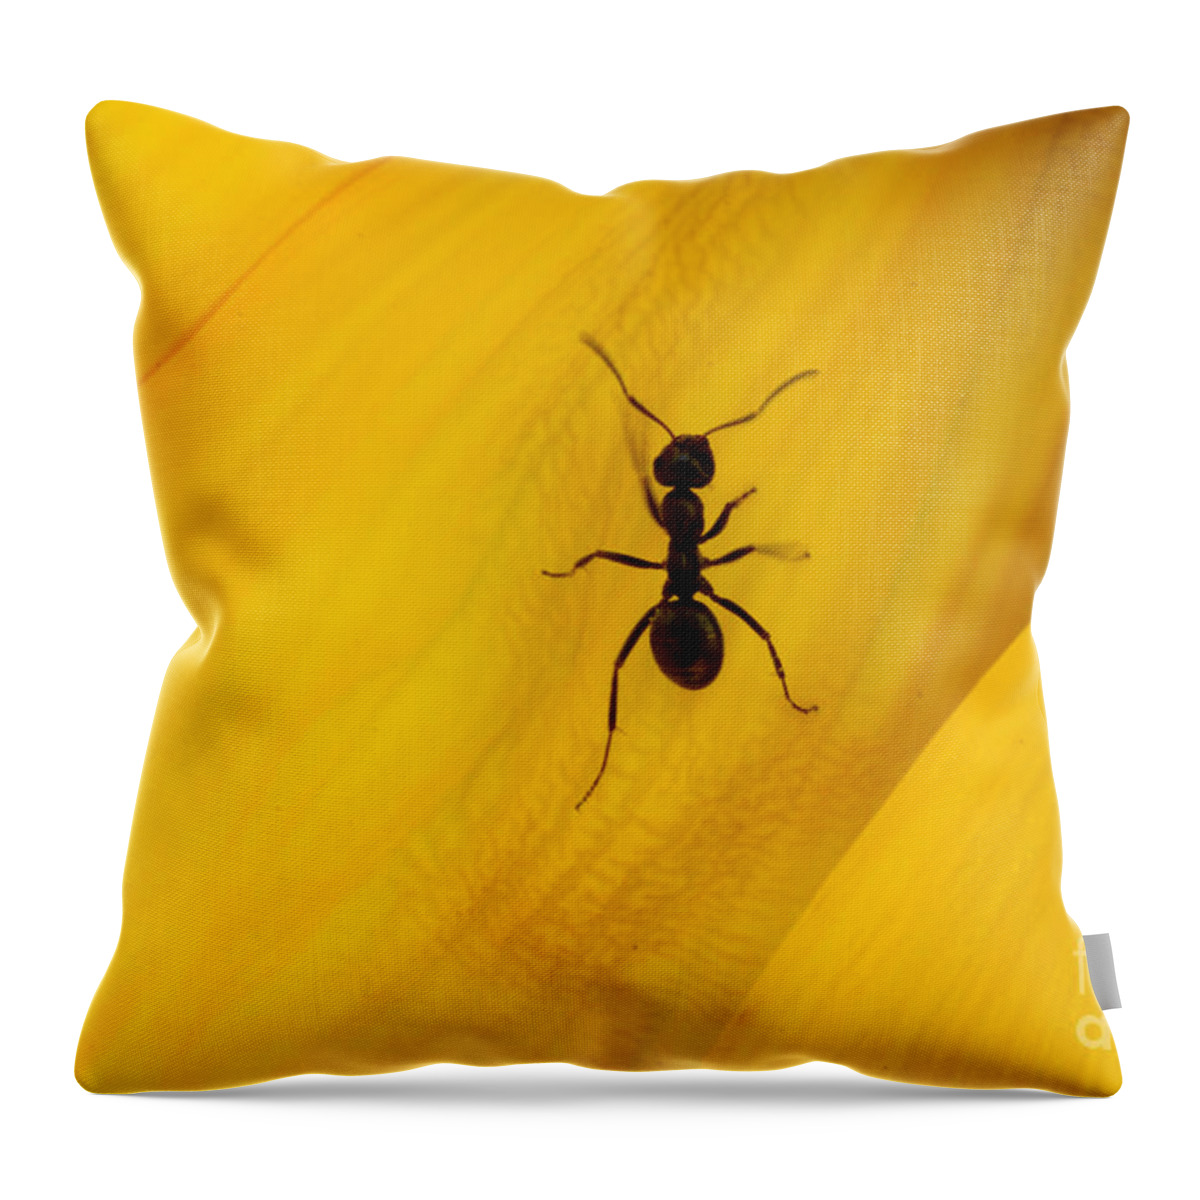 Black Throw Pillow featuring the photograph Black Ant On Sunflower Petal by Bob Christopher